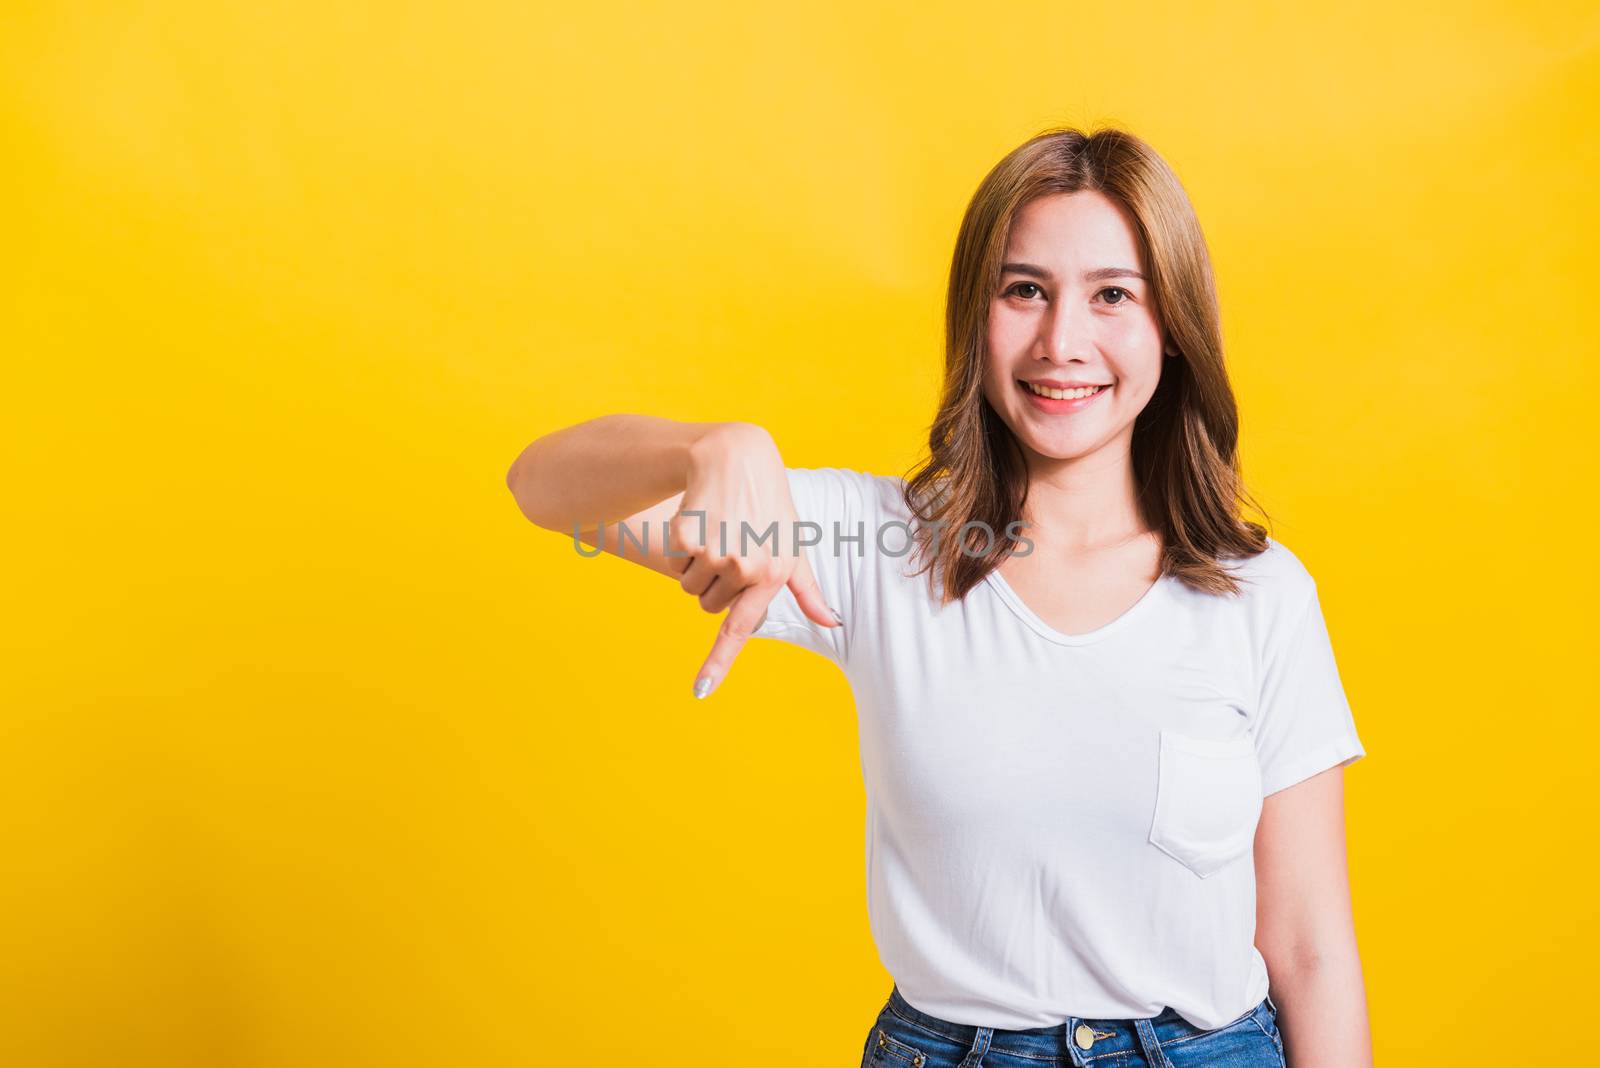 Asian Thai happy portrait beautiful cute young woman standing wear t-shirt makes gesture two fingers point below down and looking to camera, studio shot isolated on yellow background with copy space